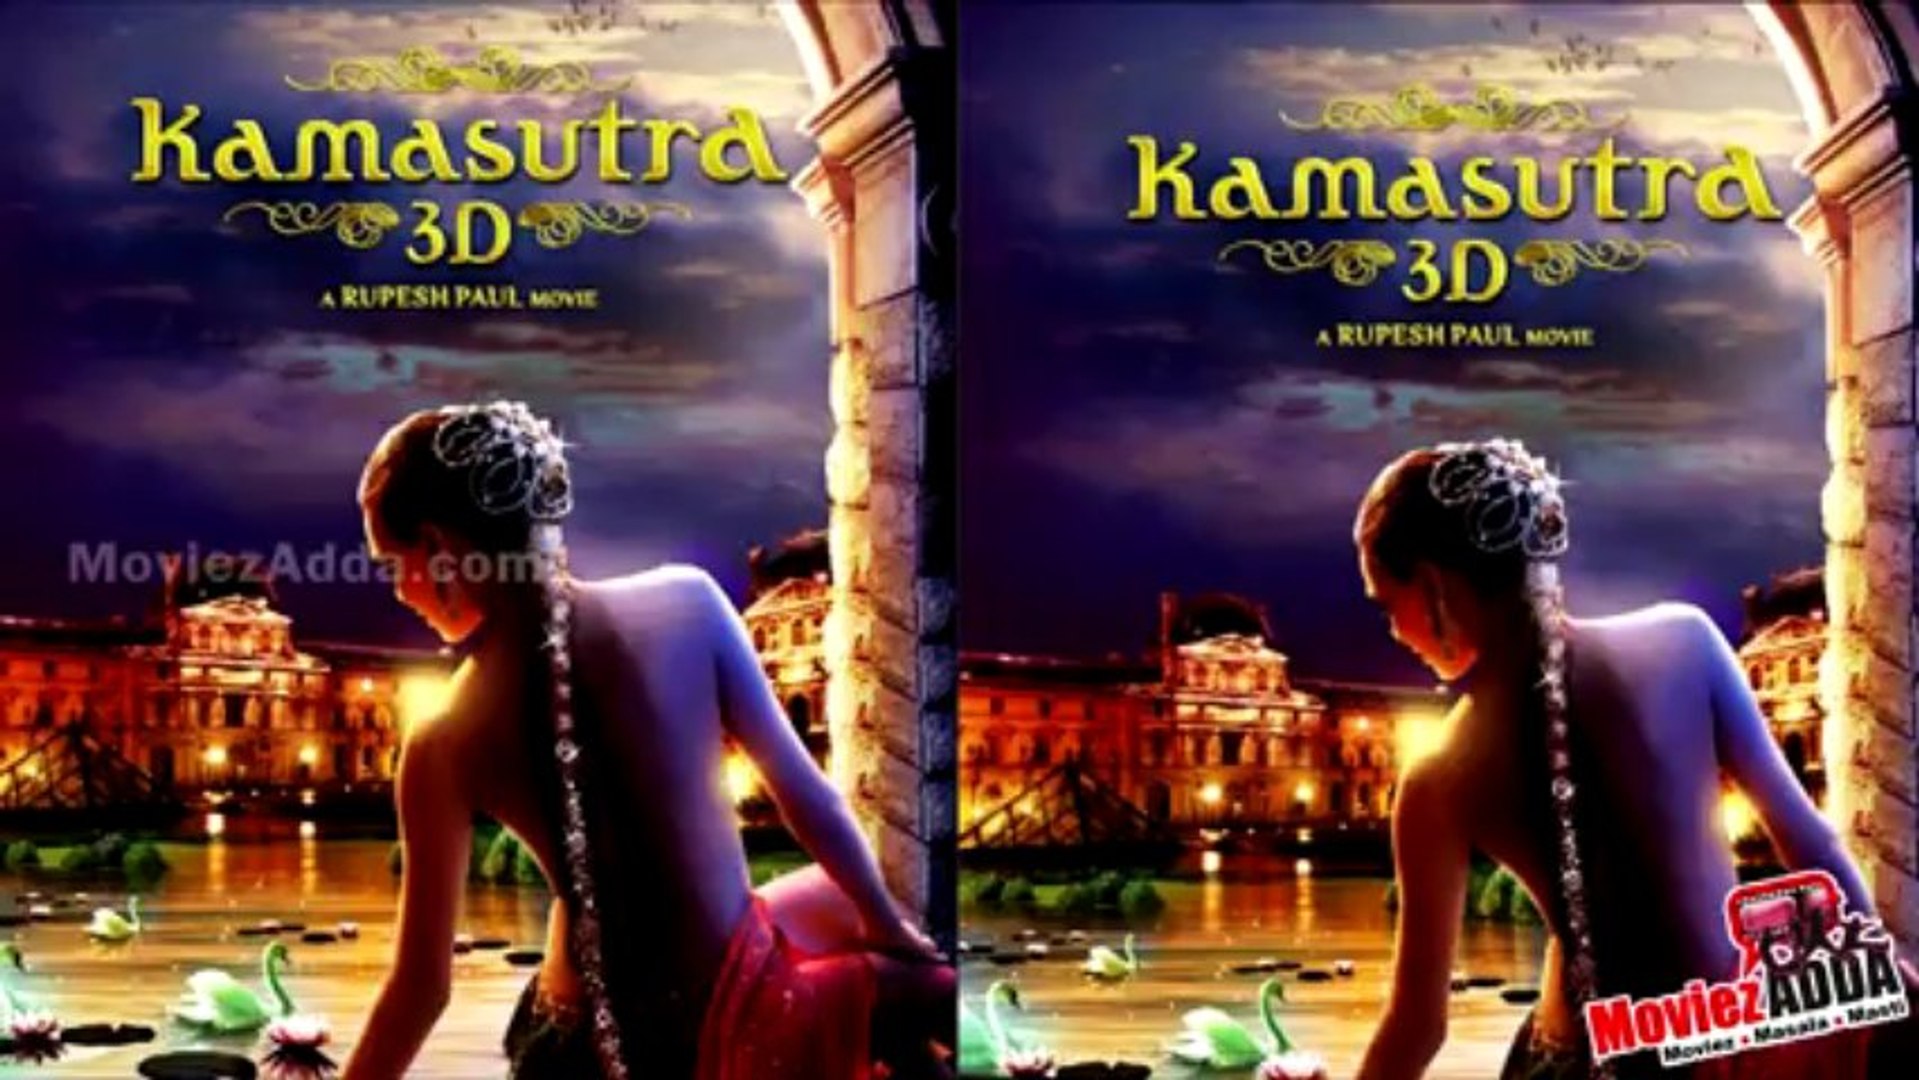 daisy farolan recommends kamasutra 3d full movie online pic